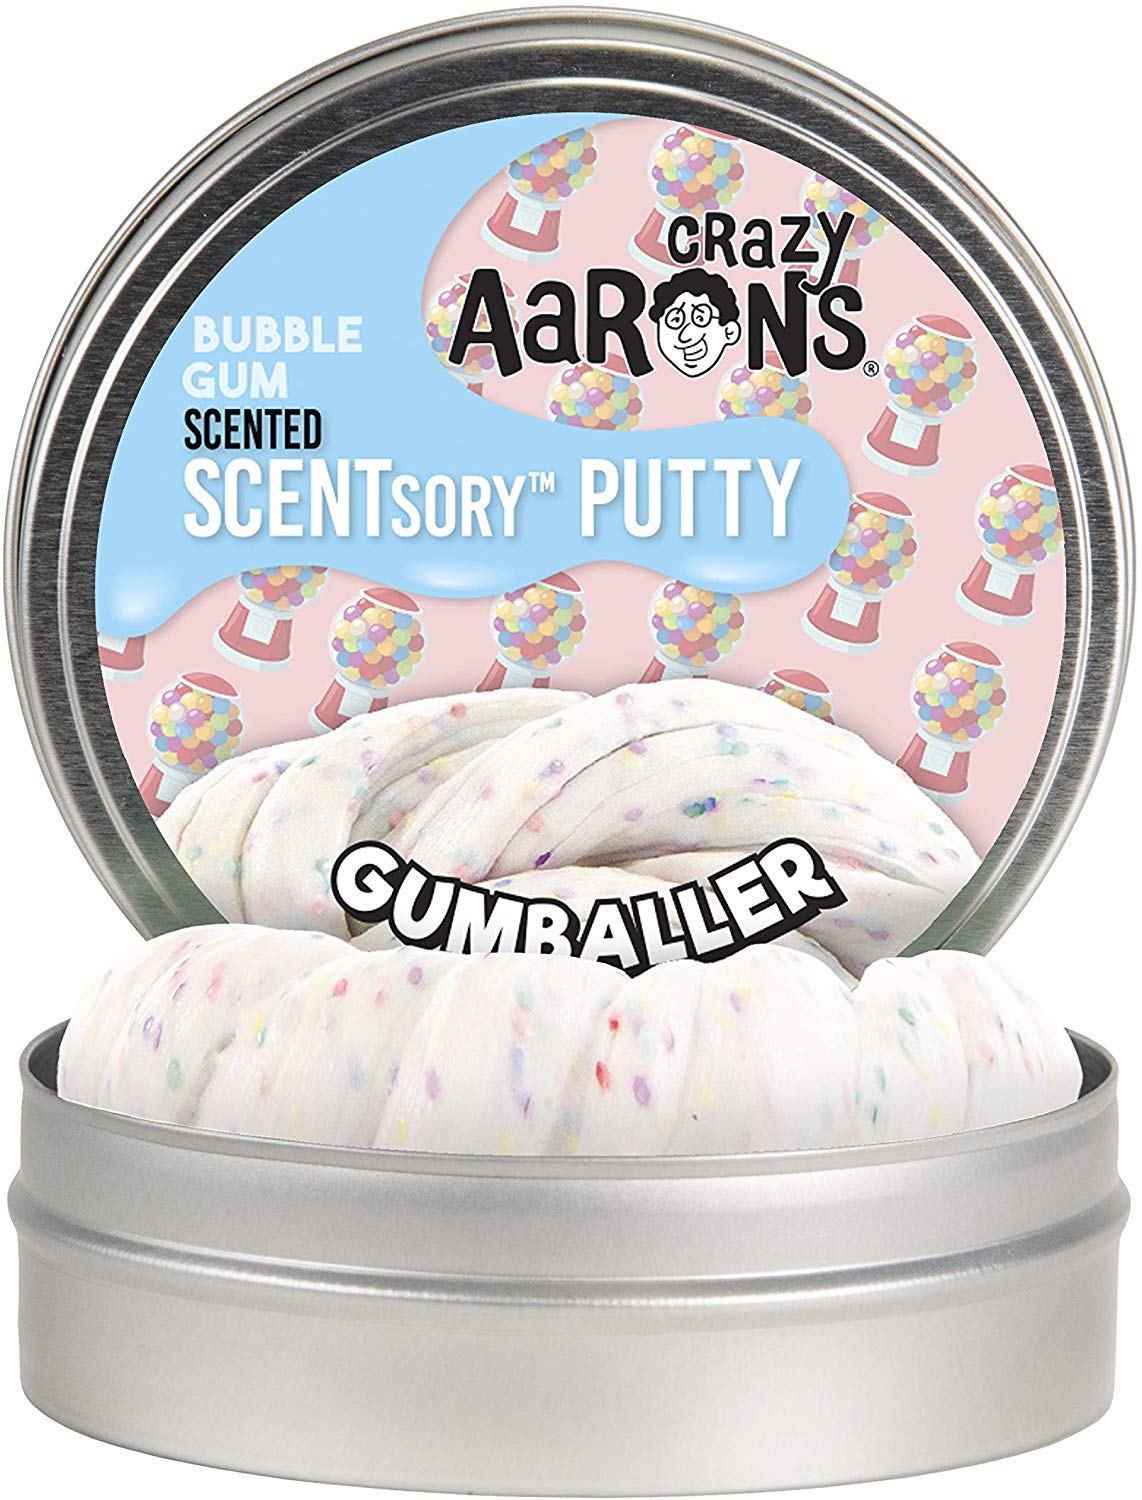 2.75" Gumballer Scented Crazy Aaron's SCENTsory Thinking Putty